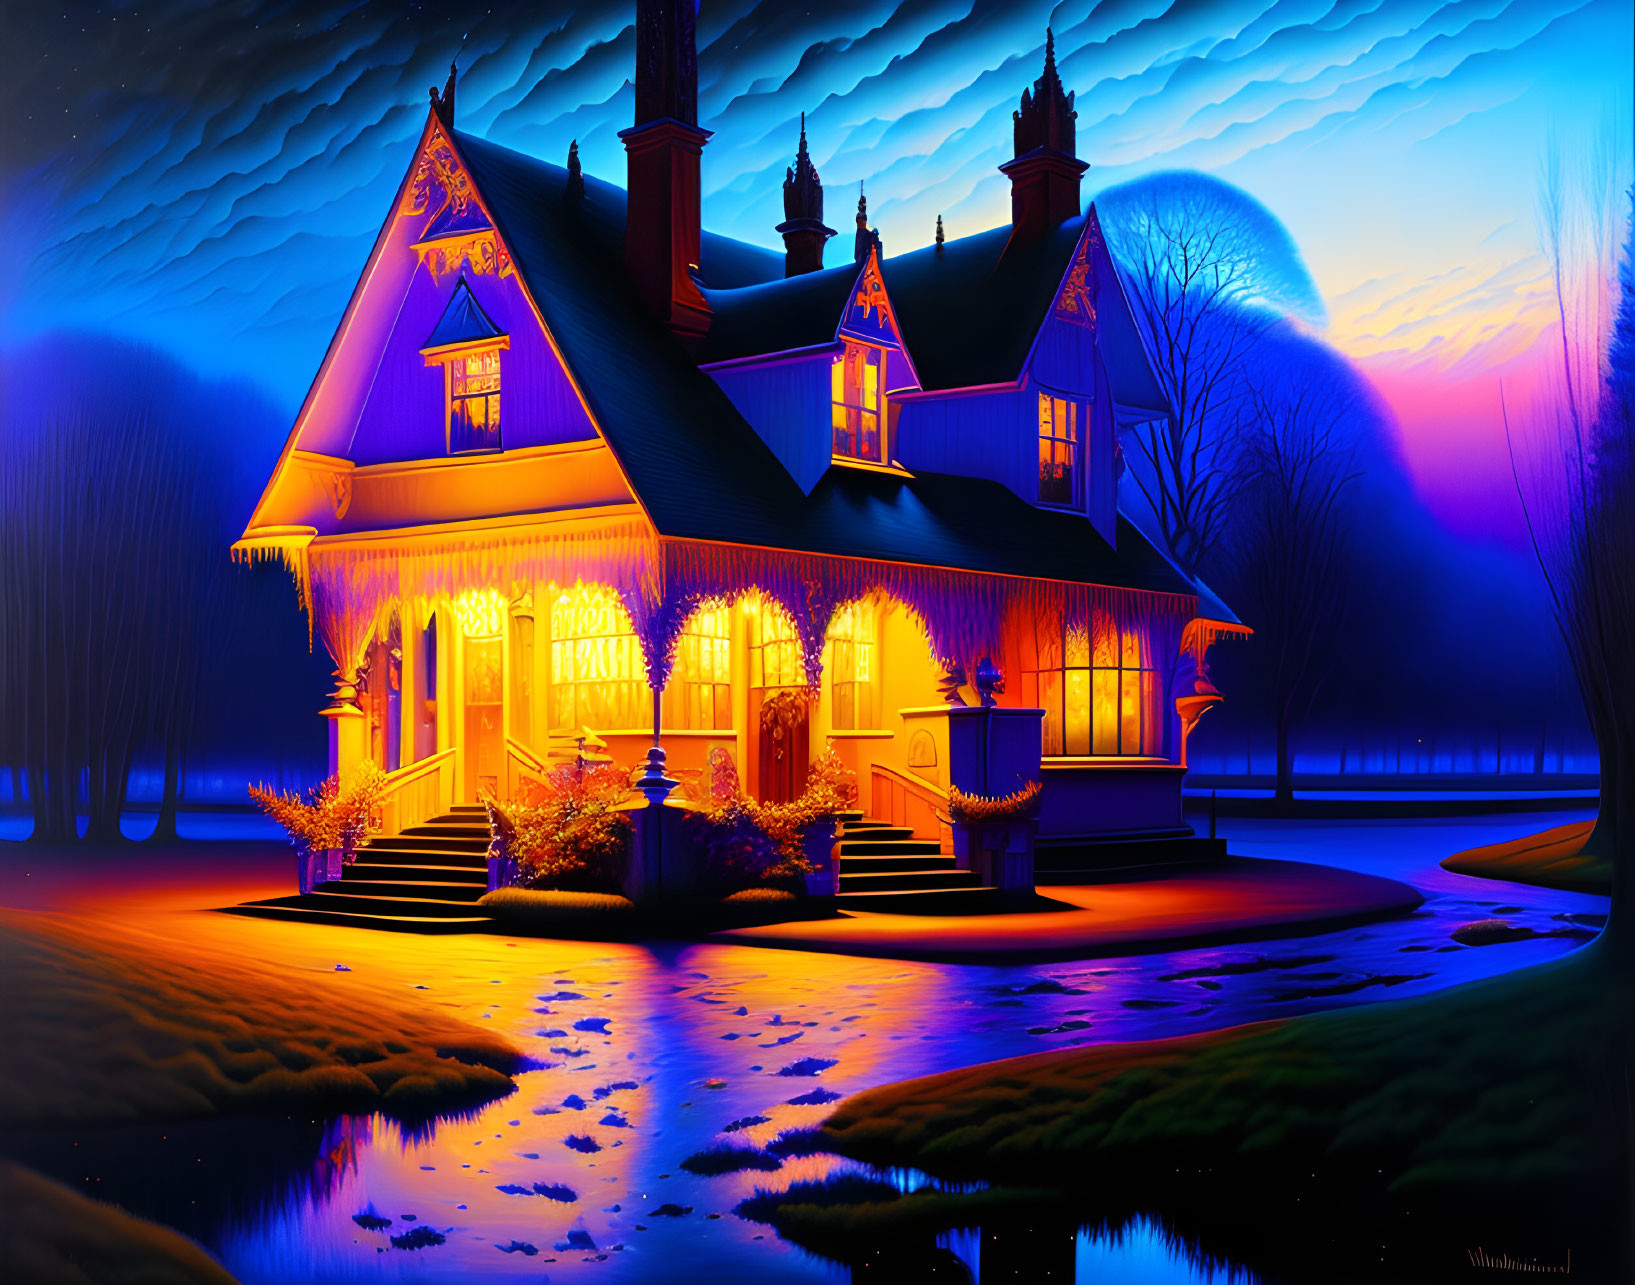 Vibrantly lit house at twilight with warm glow against cool night sky